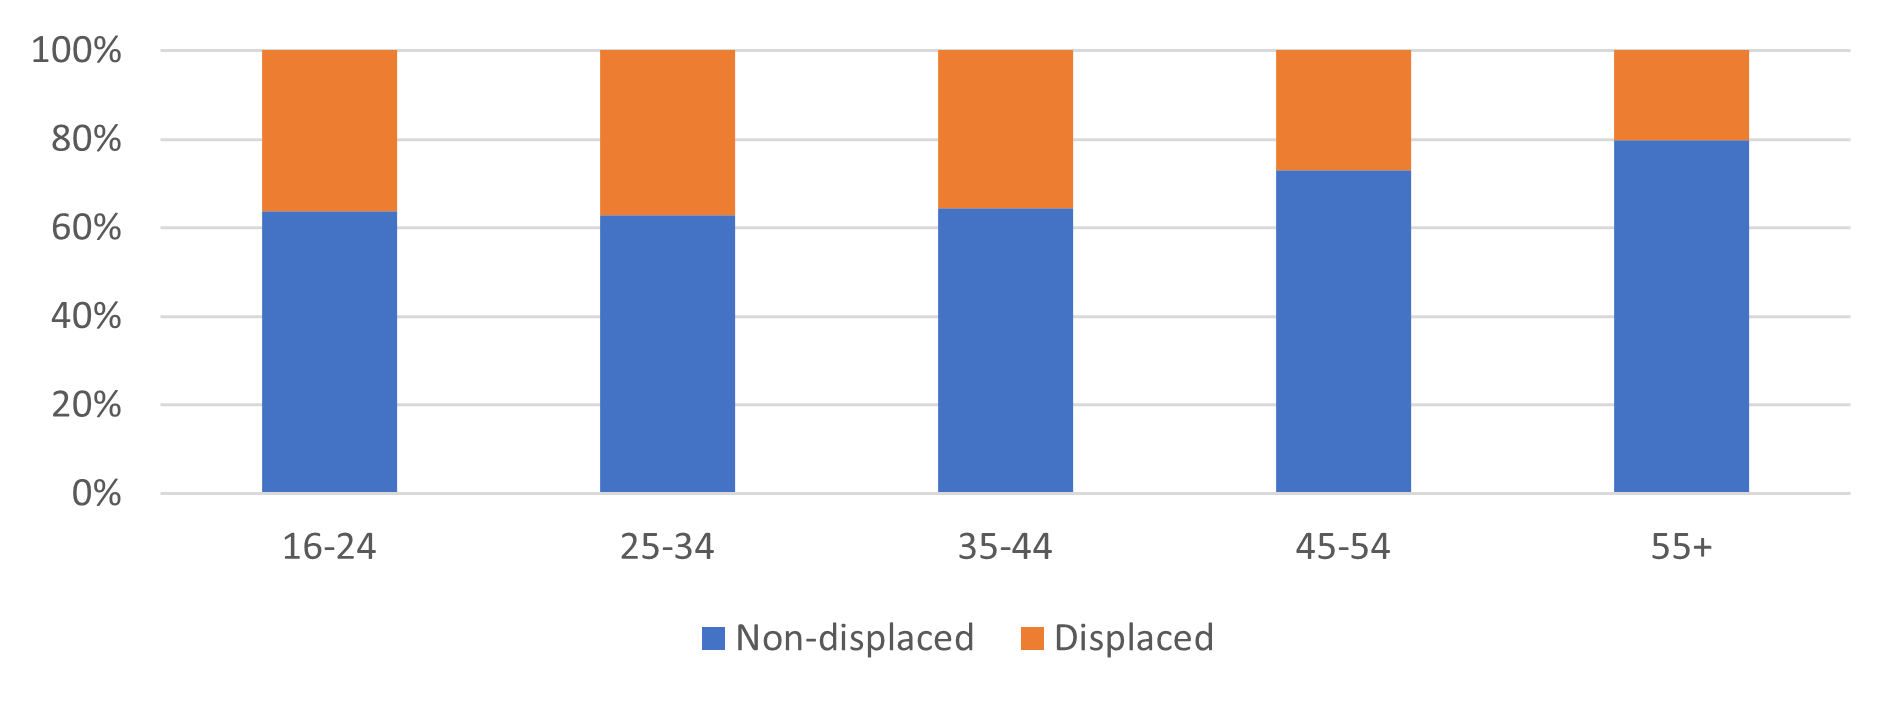 Figure 1 Displacement by age group among survey respondents